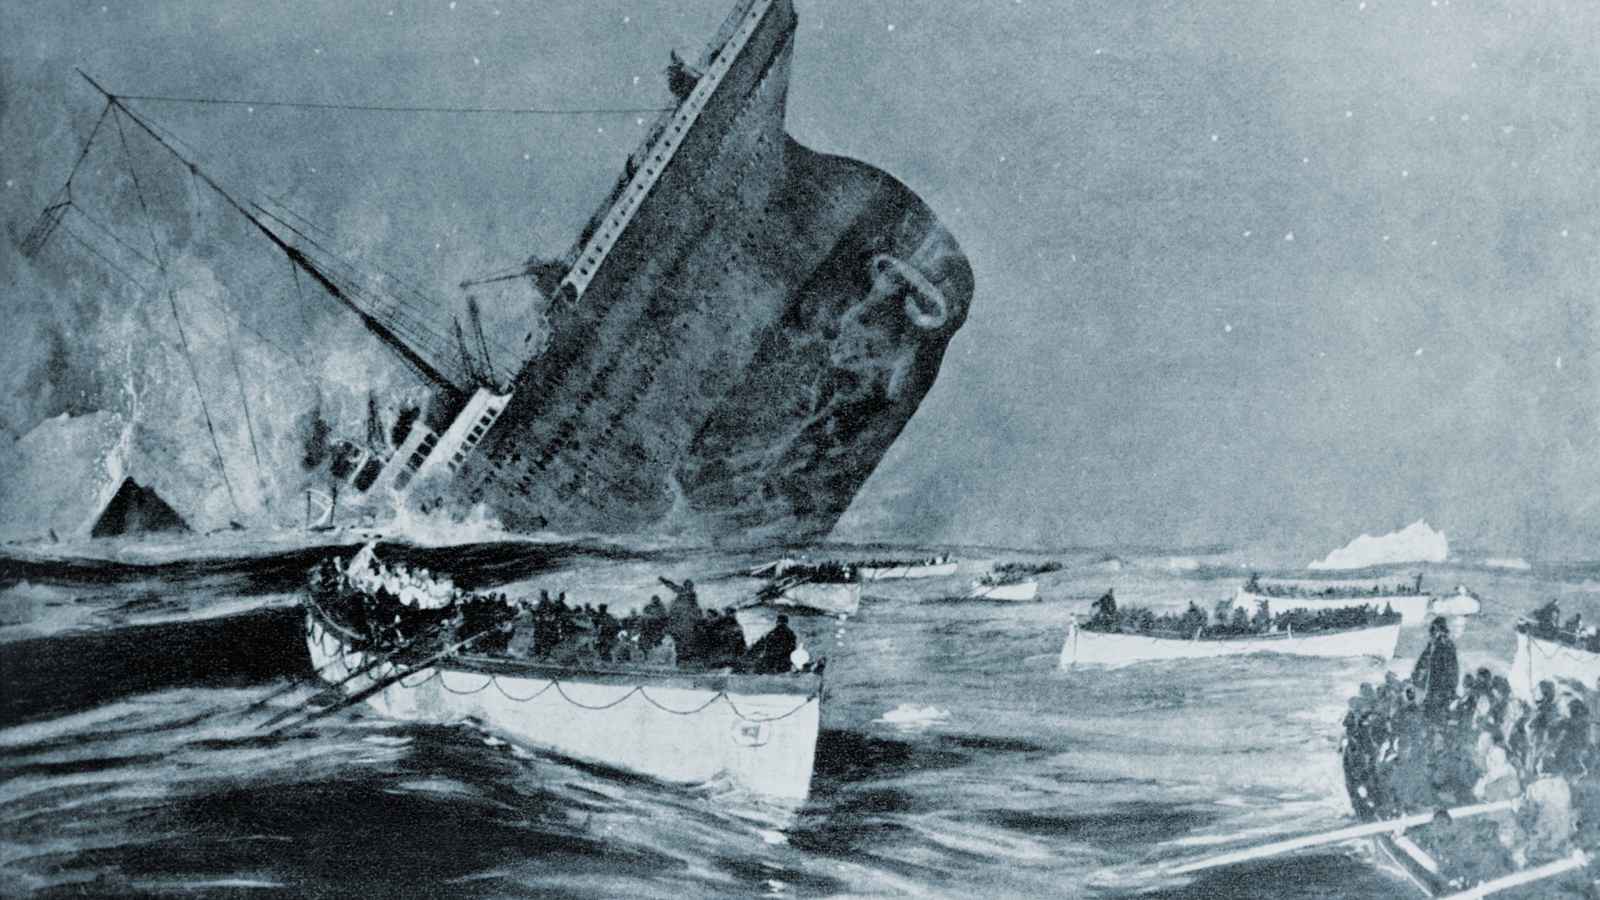 <p>The most famous and well-known of all cruise ship disasters, the sinking of the Titanic in 1912 was a tragic event that claimed the lives of over 1,500 passengers and crew members. The unsinkable luxury liner struck an iceberg on its maiden voyage from Southampton to New York City, leading to its demise.</p><p>The Titanic disaster was caused by a combination of factors, including inadequate safety measures, poor decision-making, and overconfidence in the ship’s engineering capabilities. This tragedy brought about significant changes in maritime safety regulations.</p>